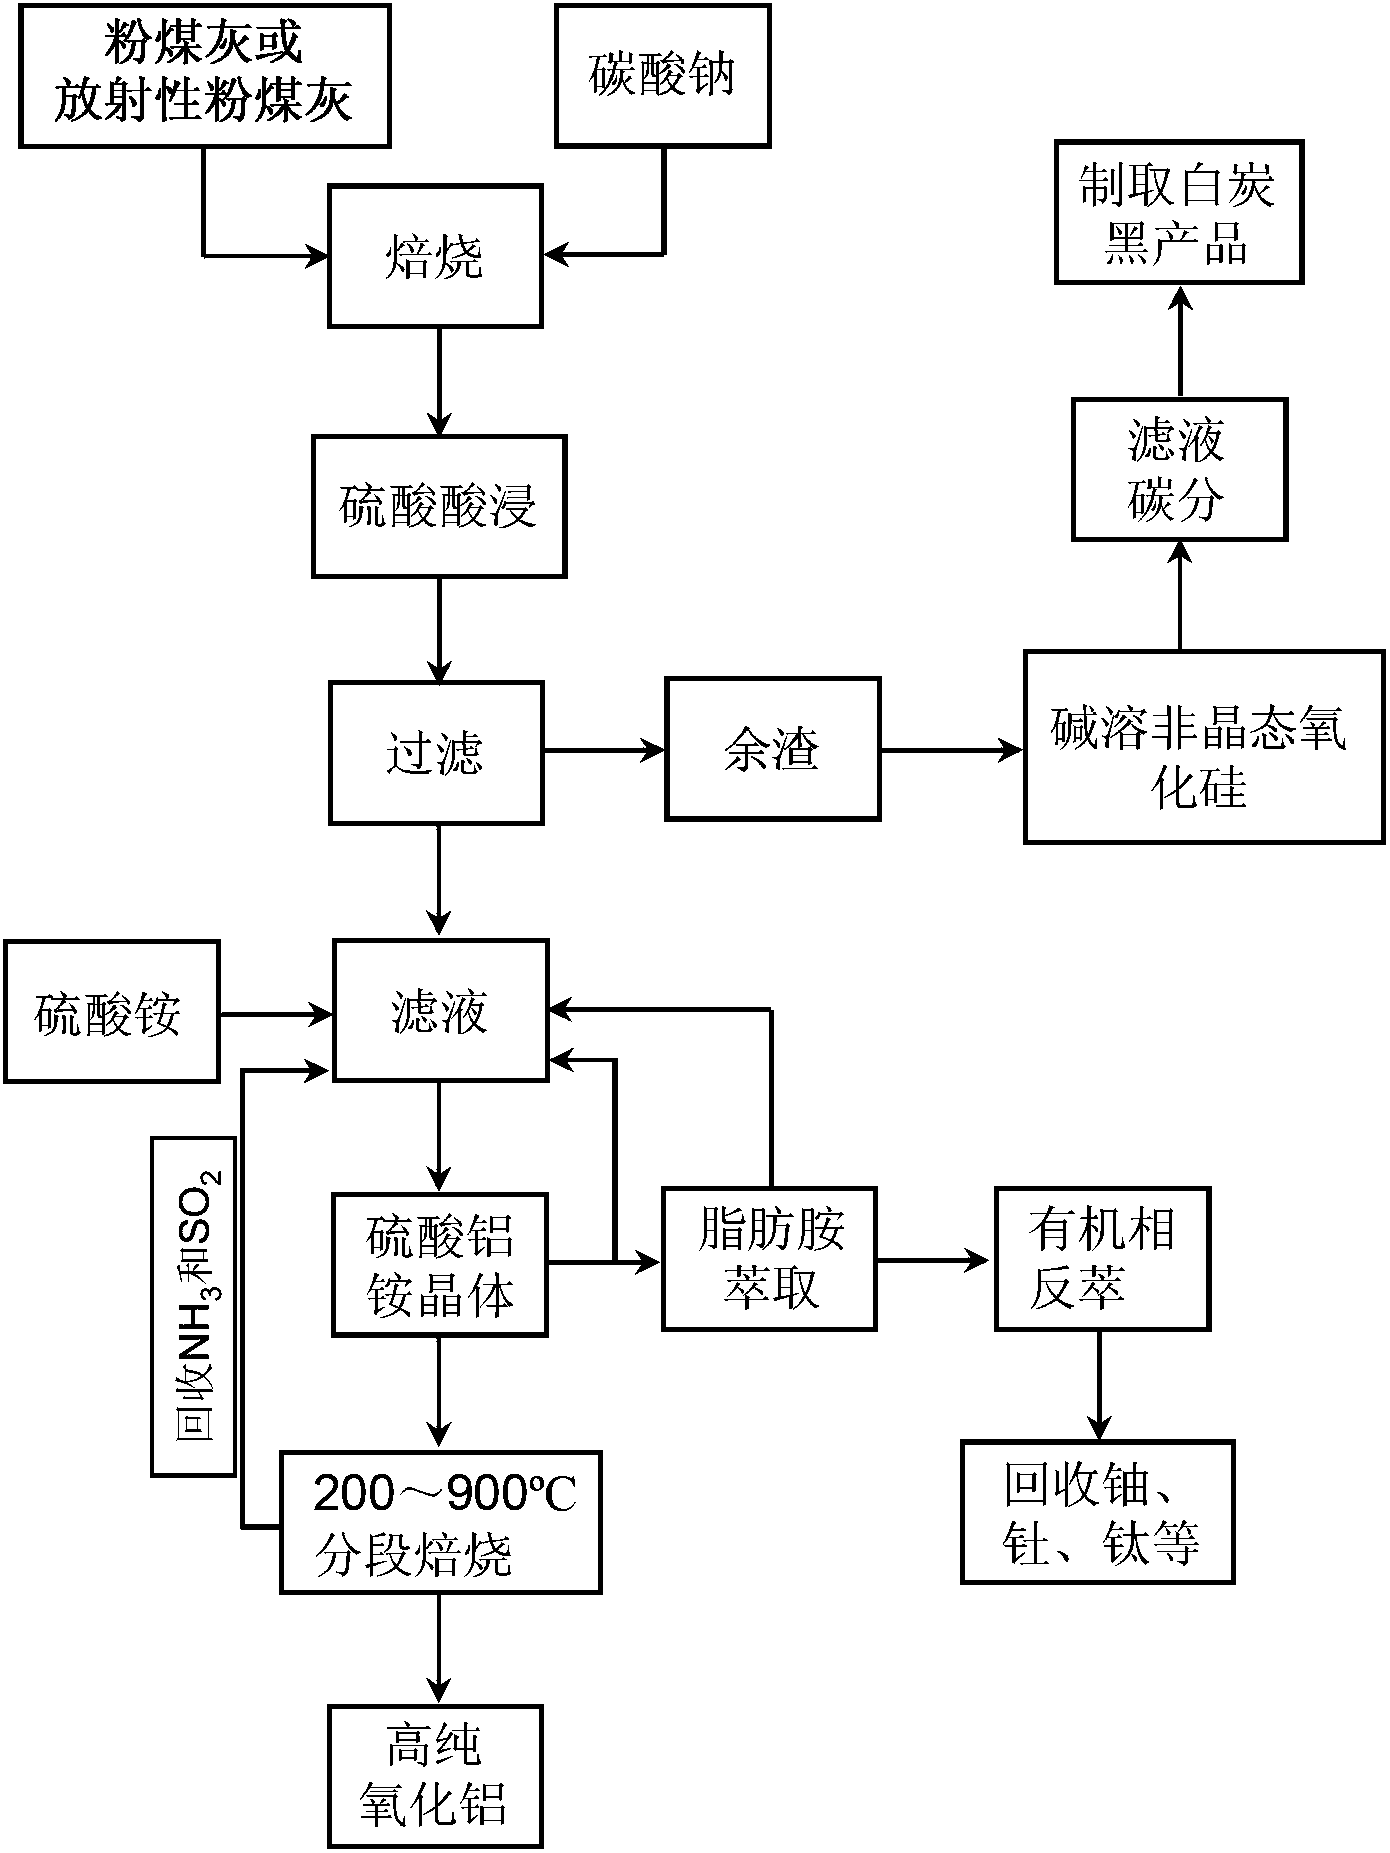 Process method for producing high-purity aluminum oxide and silicate by using pulverized fuel ash